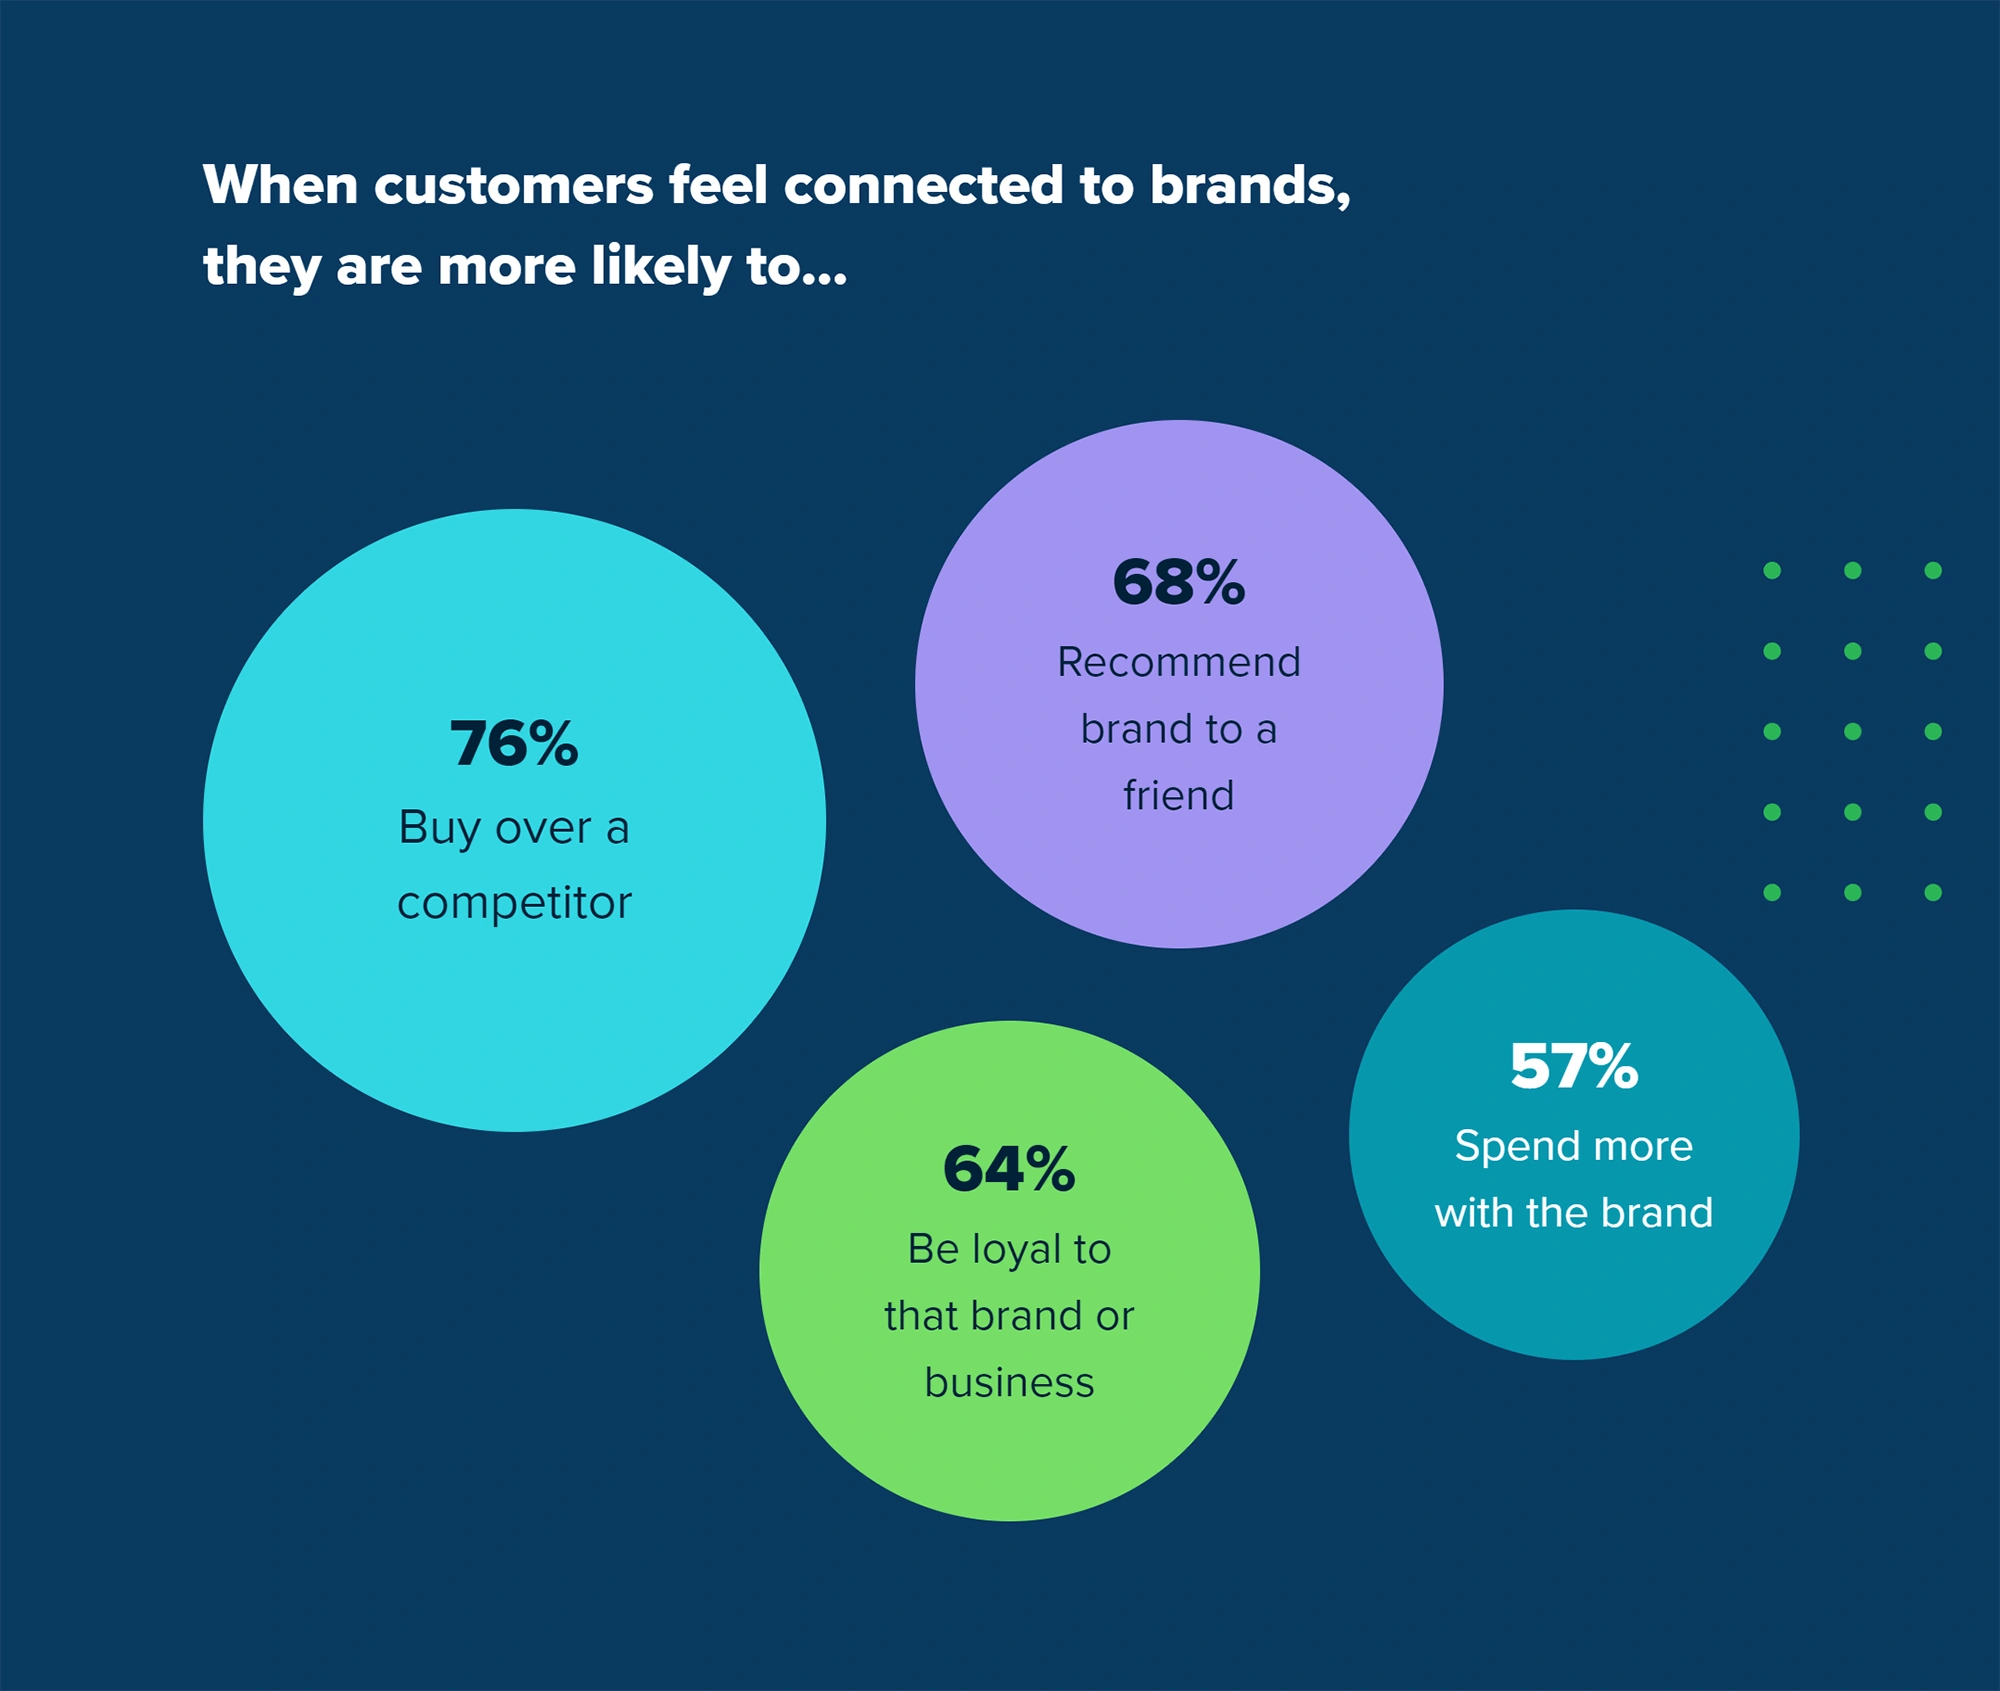 What customer feels connected with brands explained